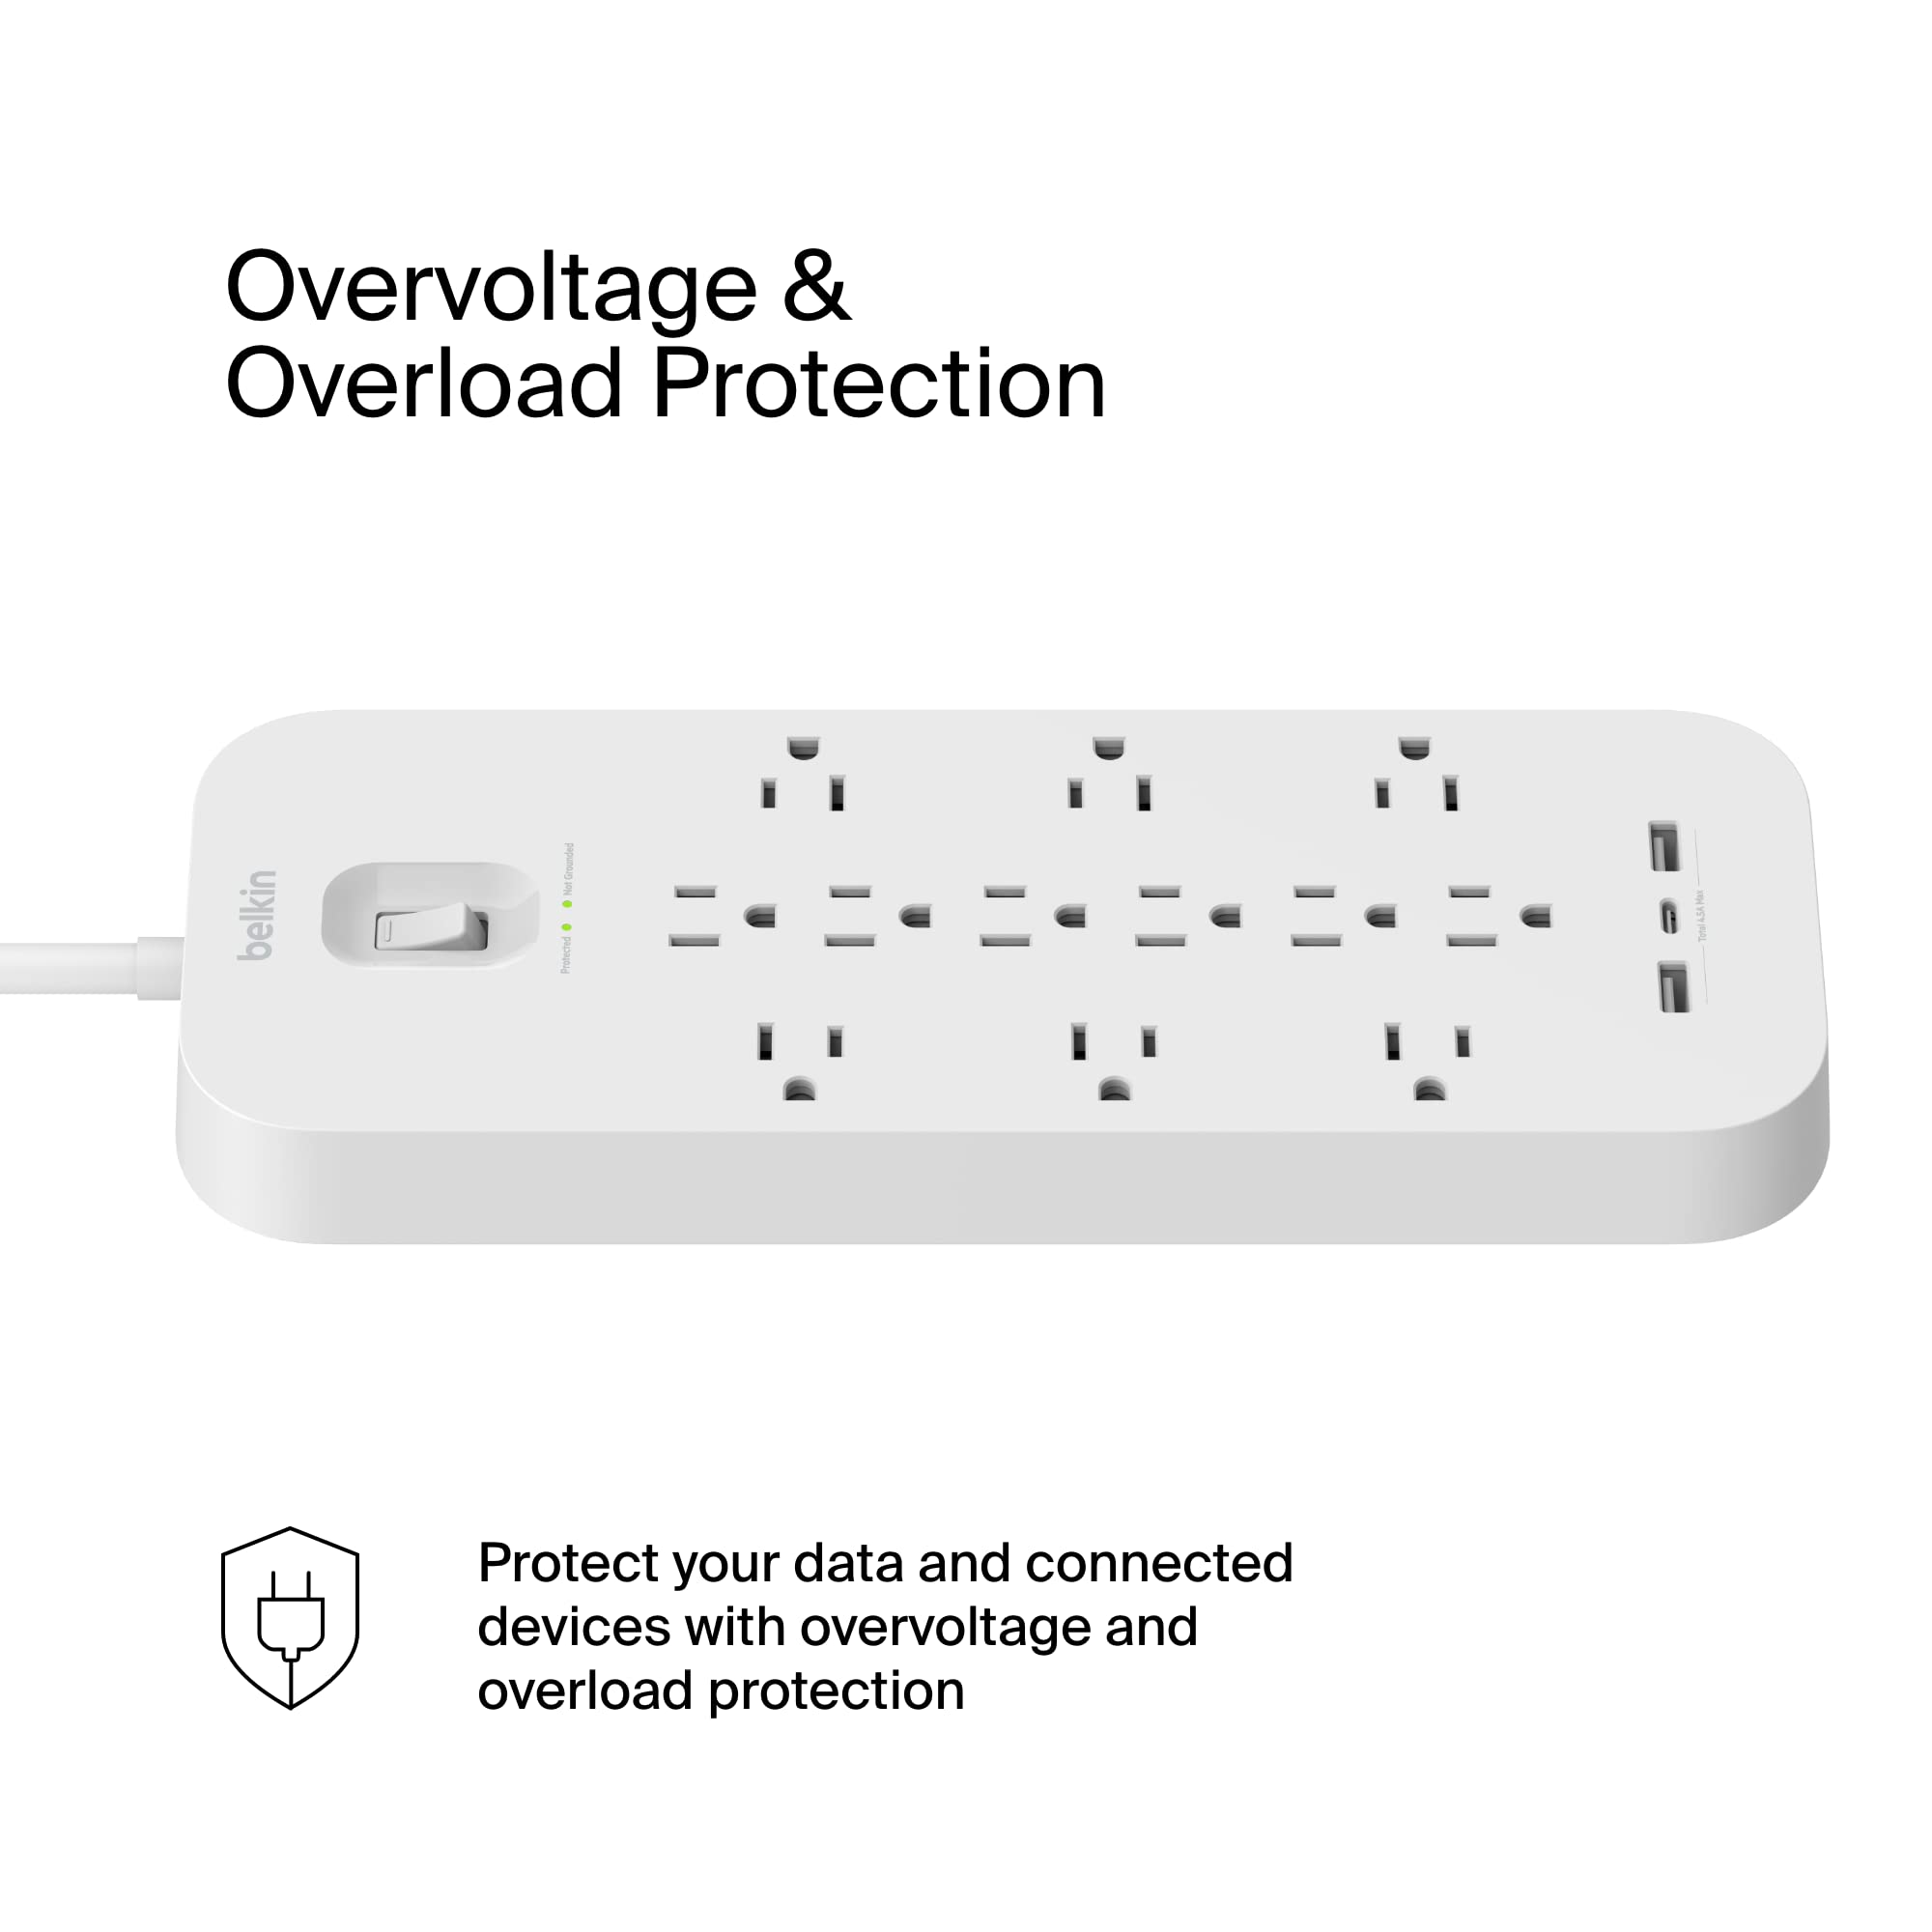 Belkin 12-Outlet Surge Protector Power Strip w/ 12 AC Outlets, 1 USB-C Port, & 2 USB-A Ports, 6ft Cable, Overload and Overvoltage Protection, and On/Off Power Switch - 4,000 Joules of Protection